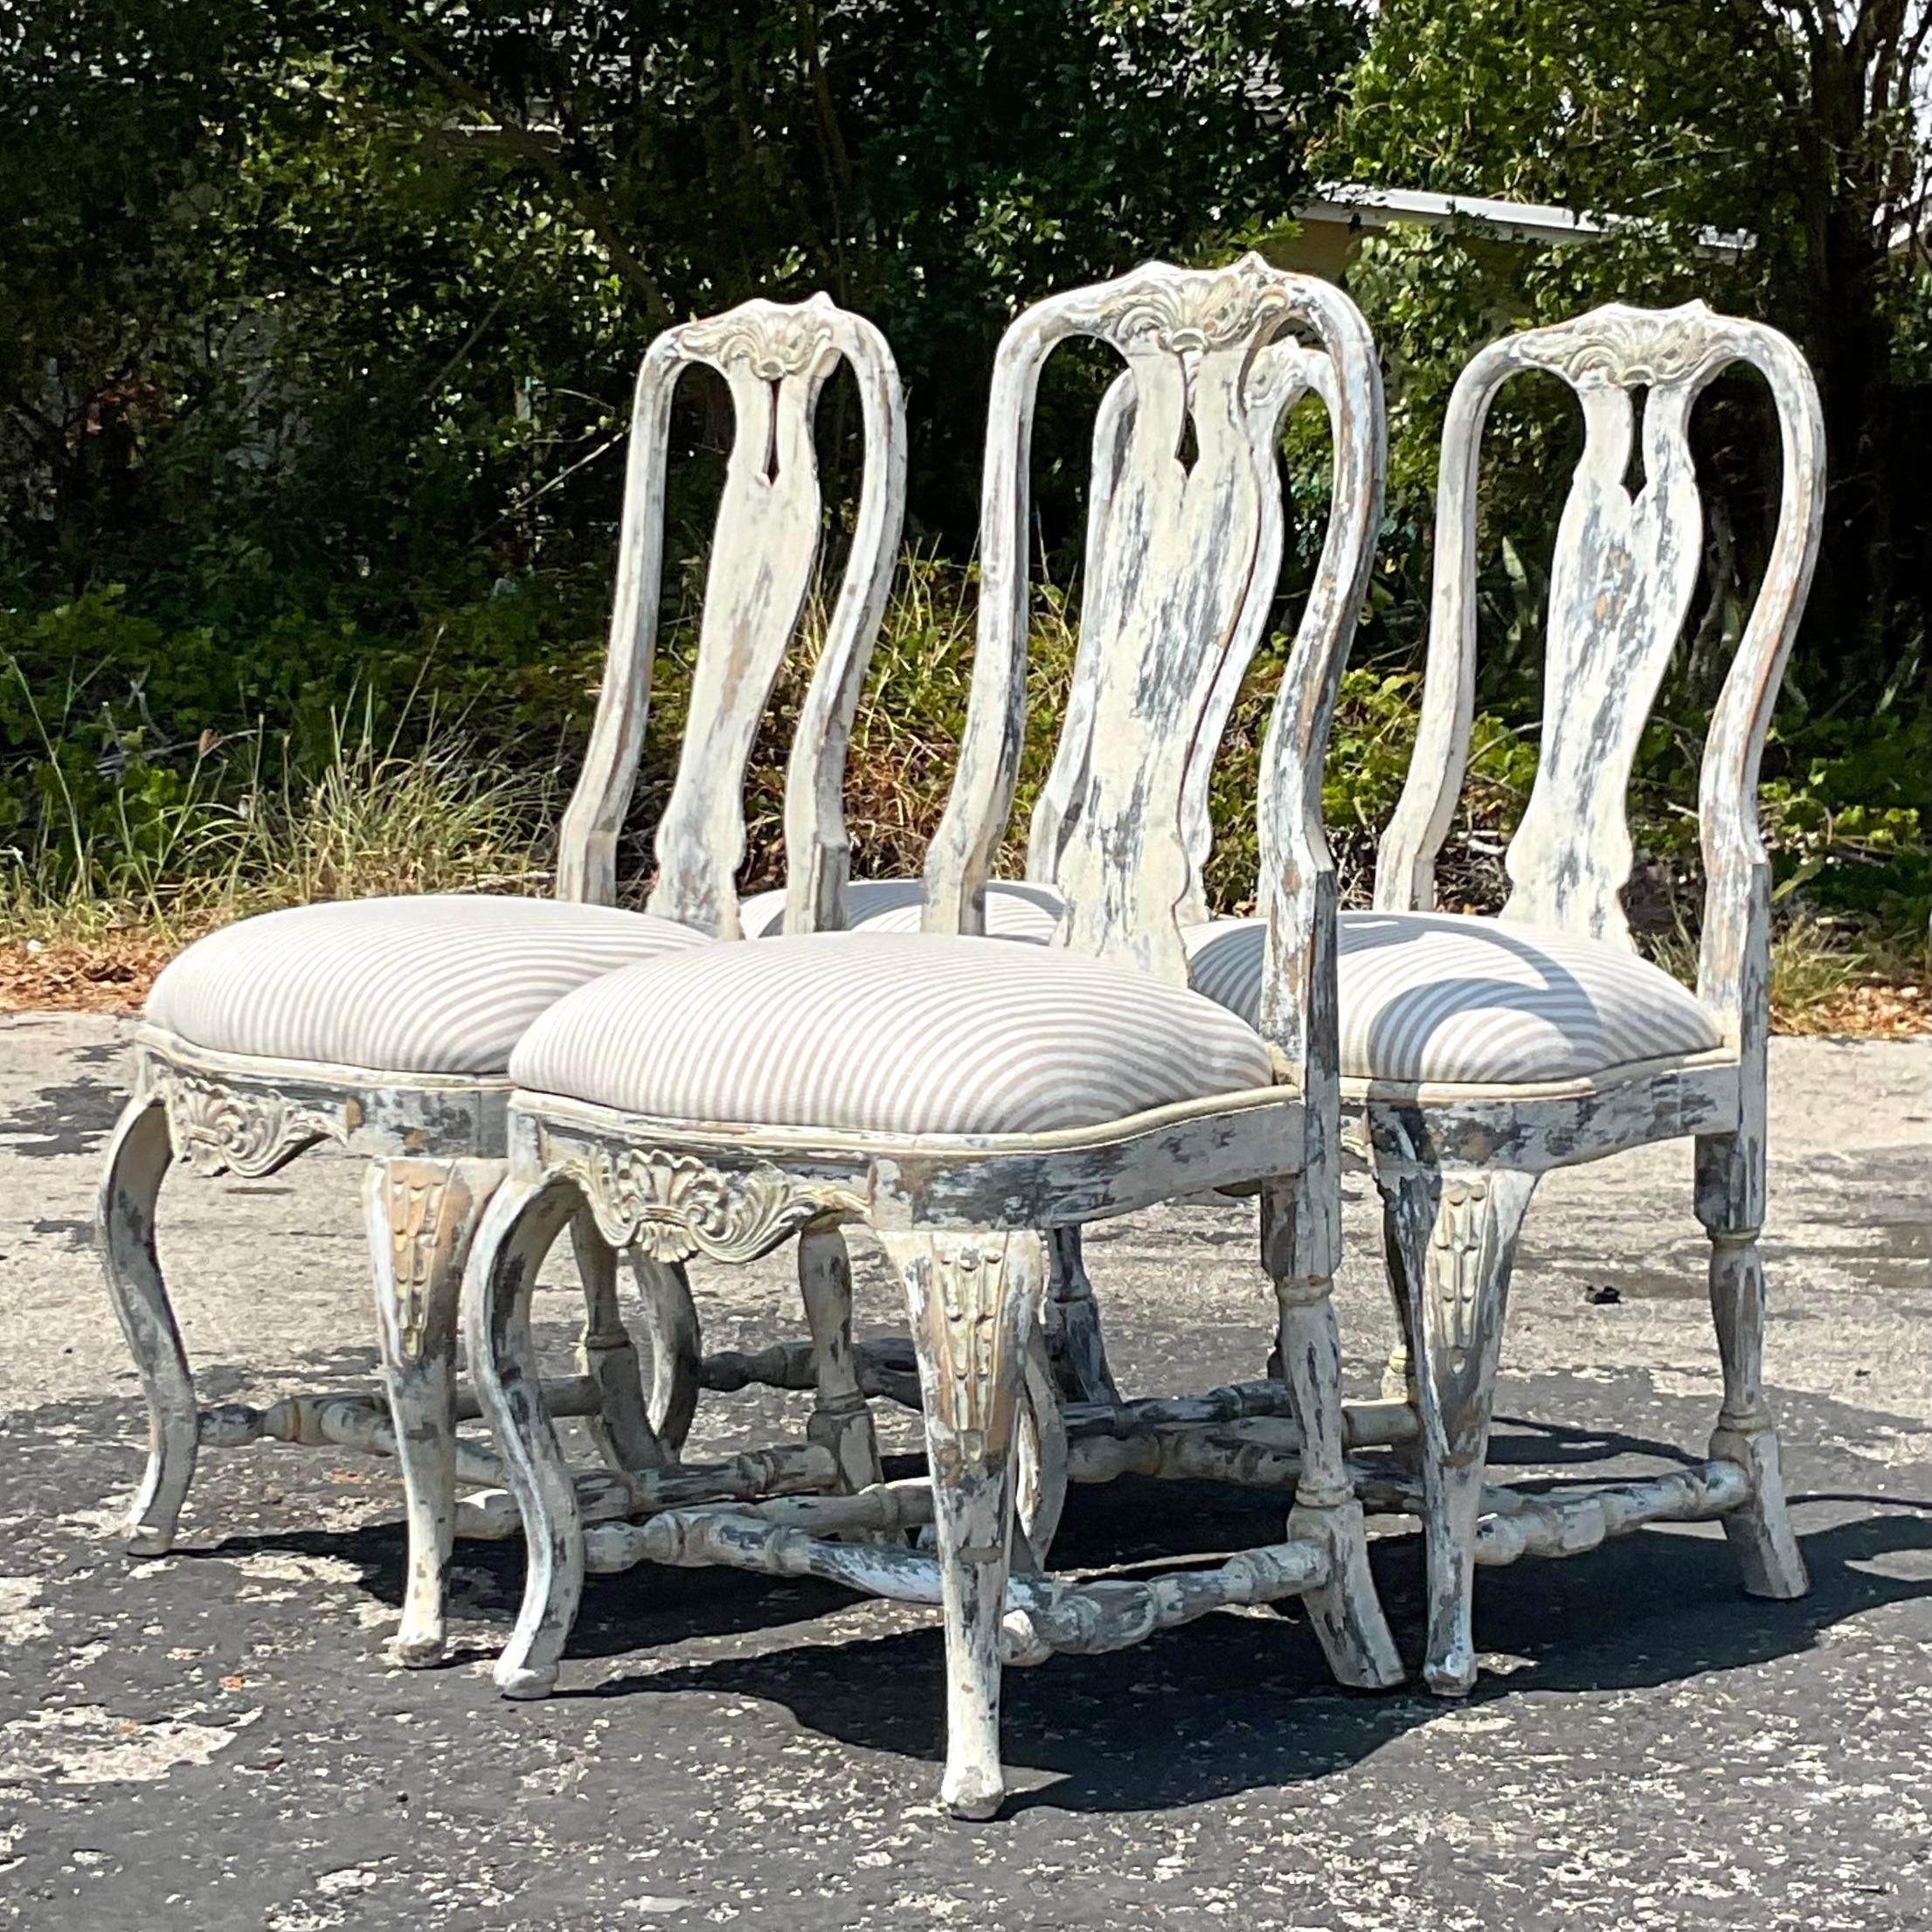 A stunning set of four vintage Boho dining chairs. A chic Queen Ann style with a contemporary patinated finish. Newly reupholstered in a striped neutral. Acquired from a Palm Beach estate.